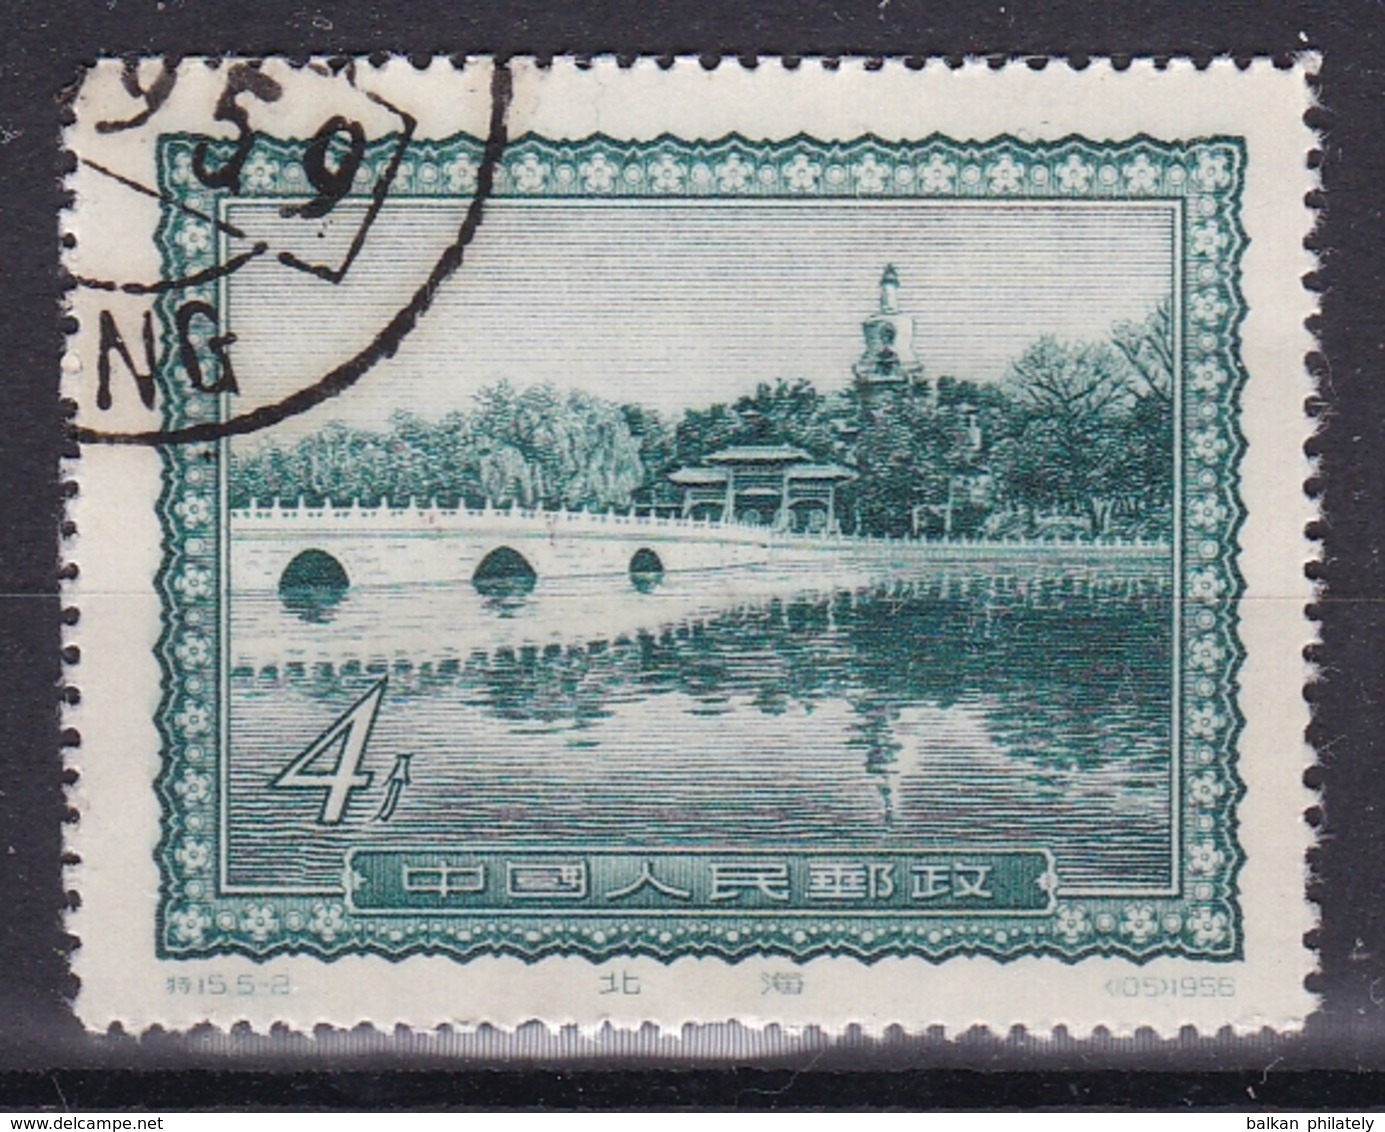 China Chine 1956 S15 5-2 Scenic Spots Of Beijing Bridge Used - Used Stamps